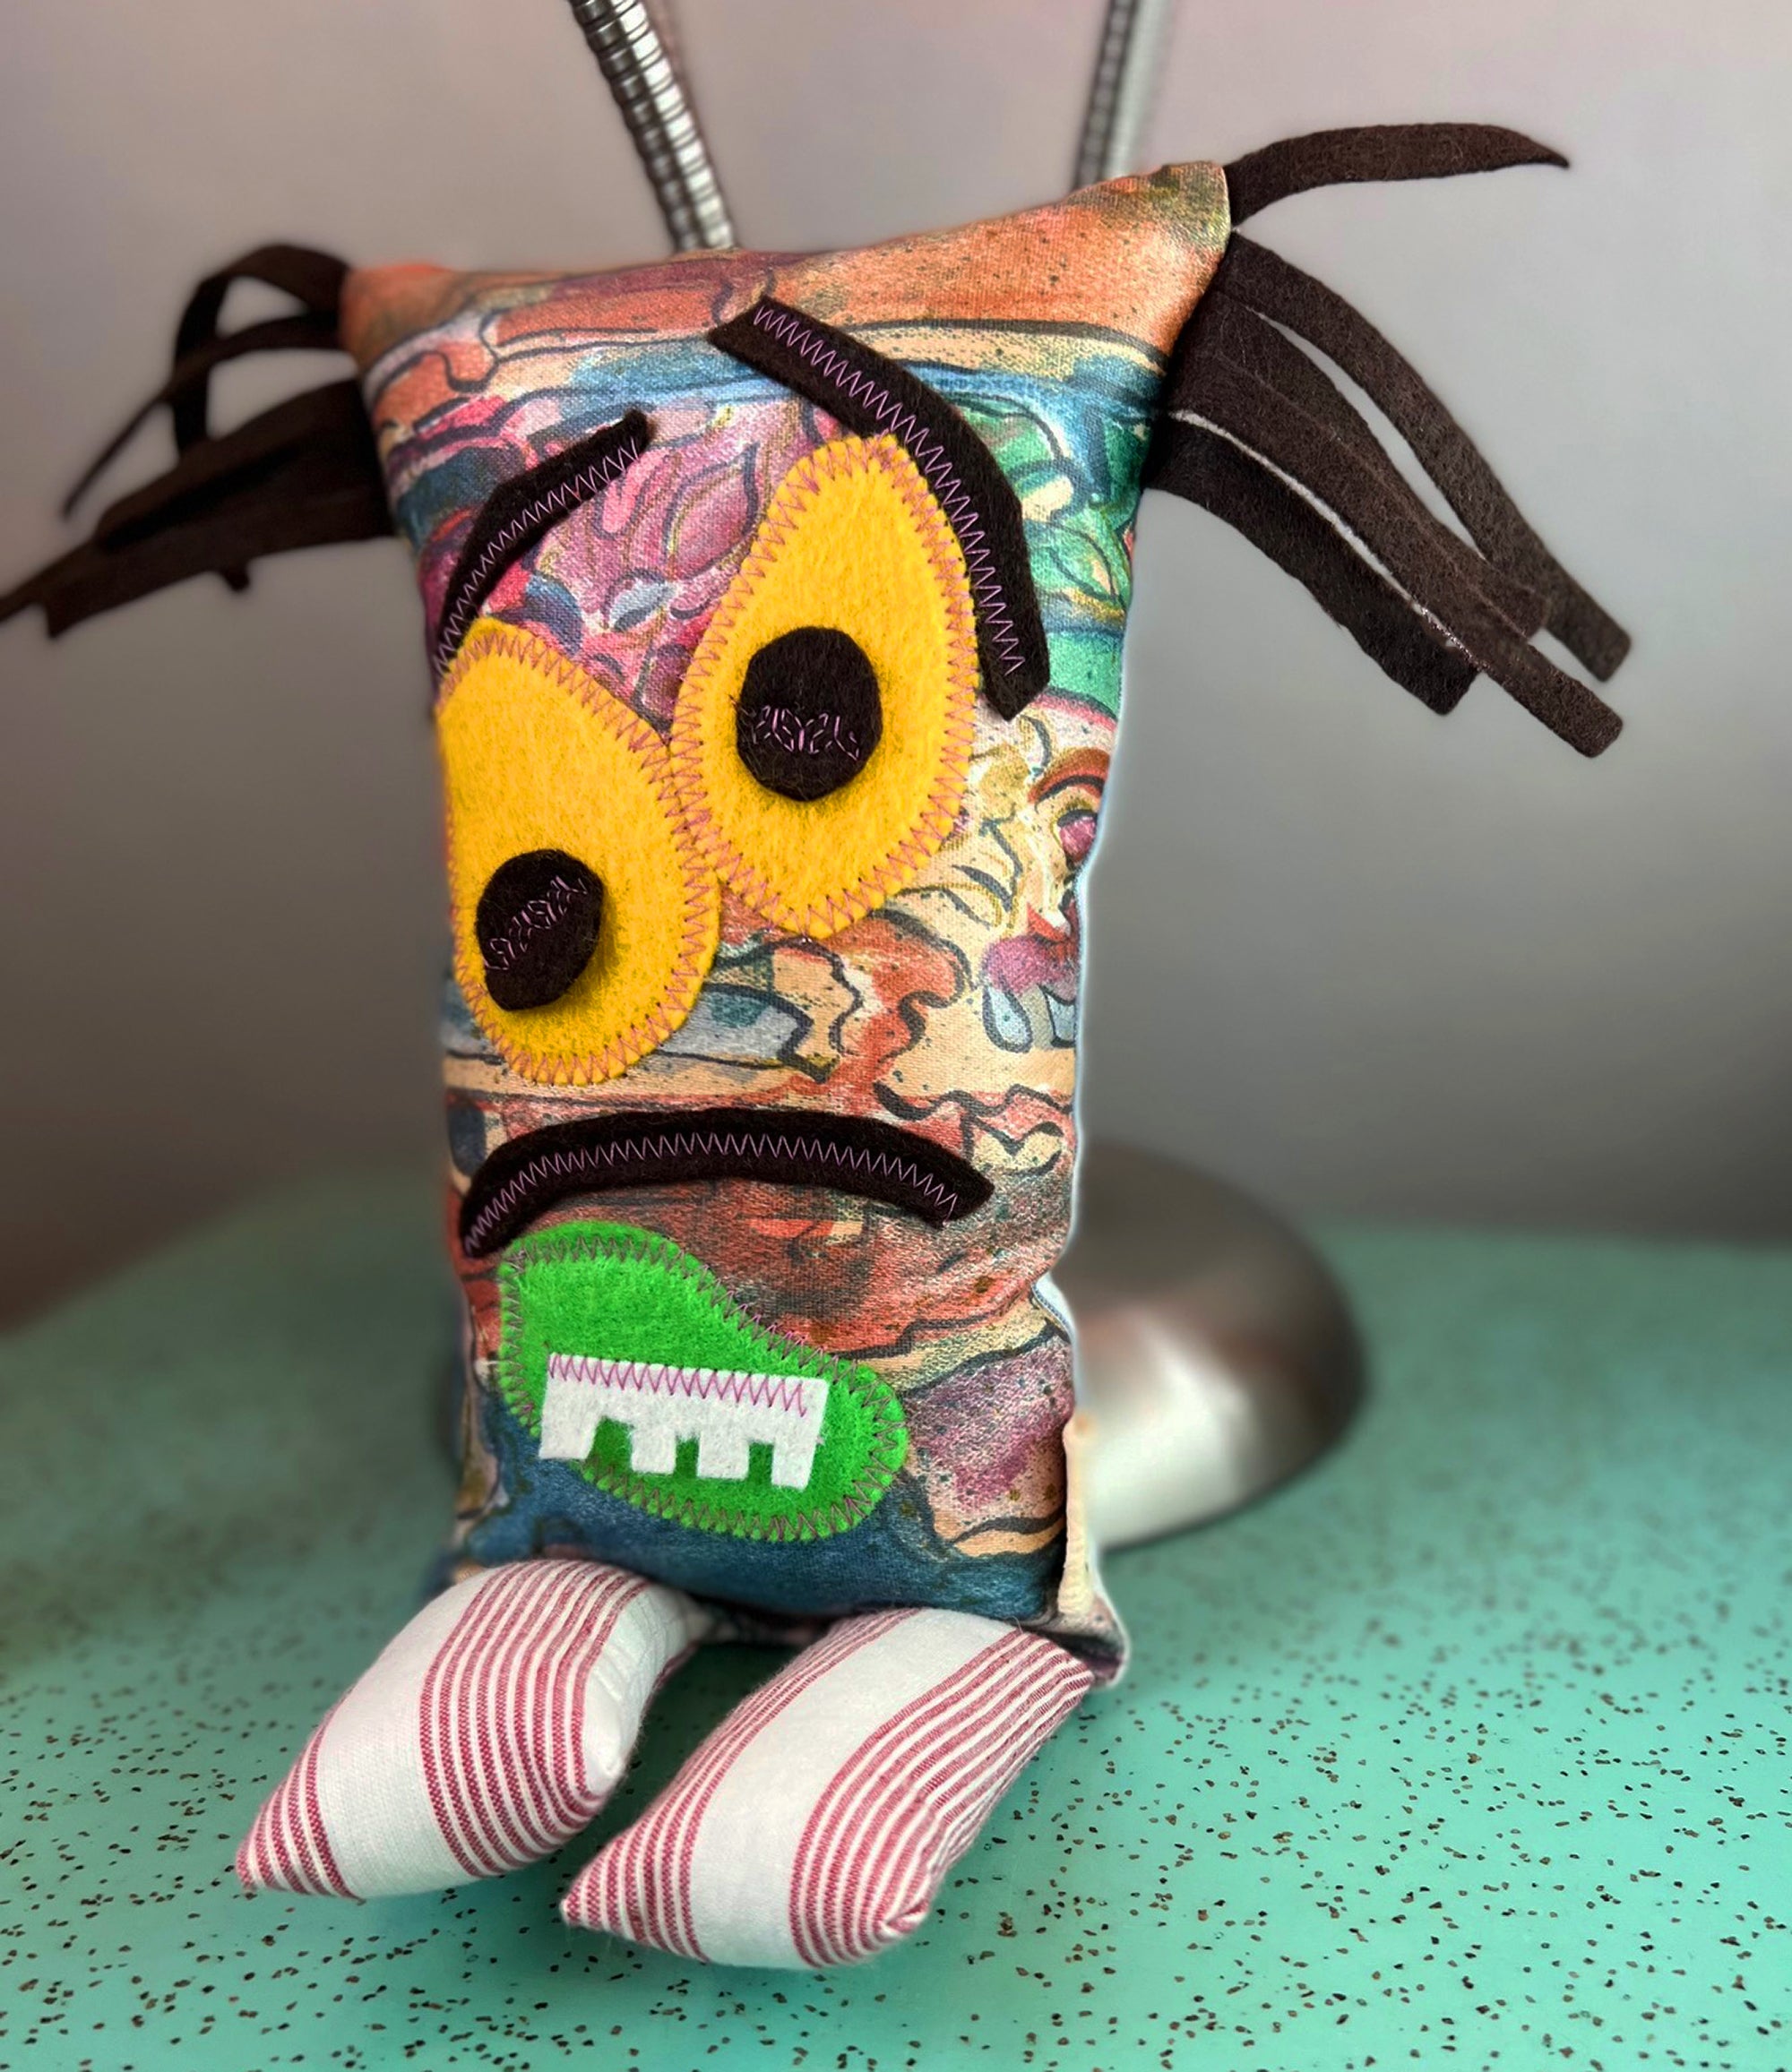 Little Monster "Wolfgang" Handmade Recycled Fabric Plush Toy Doll